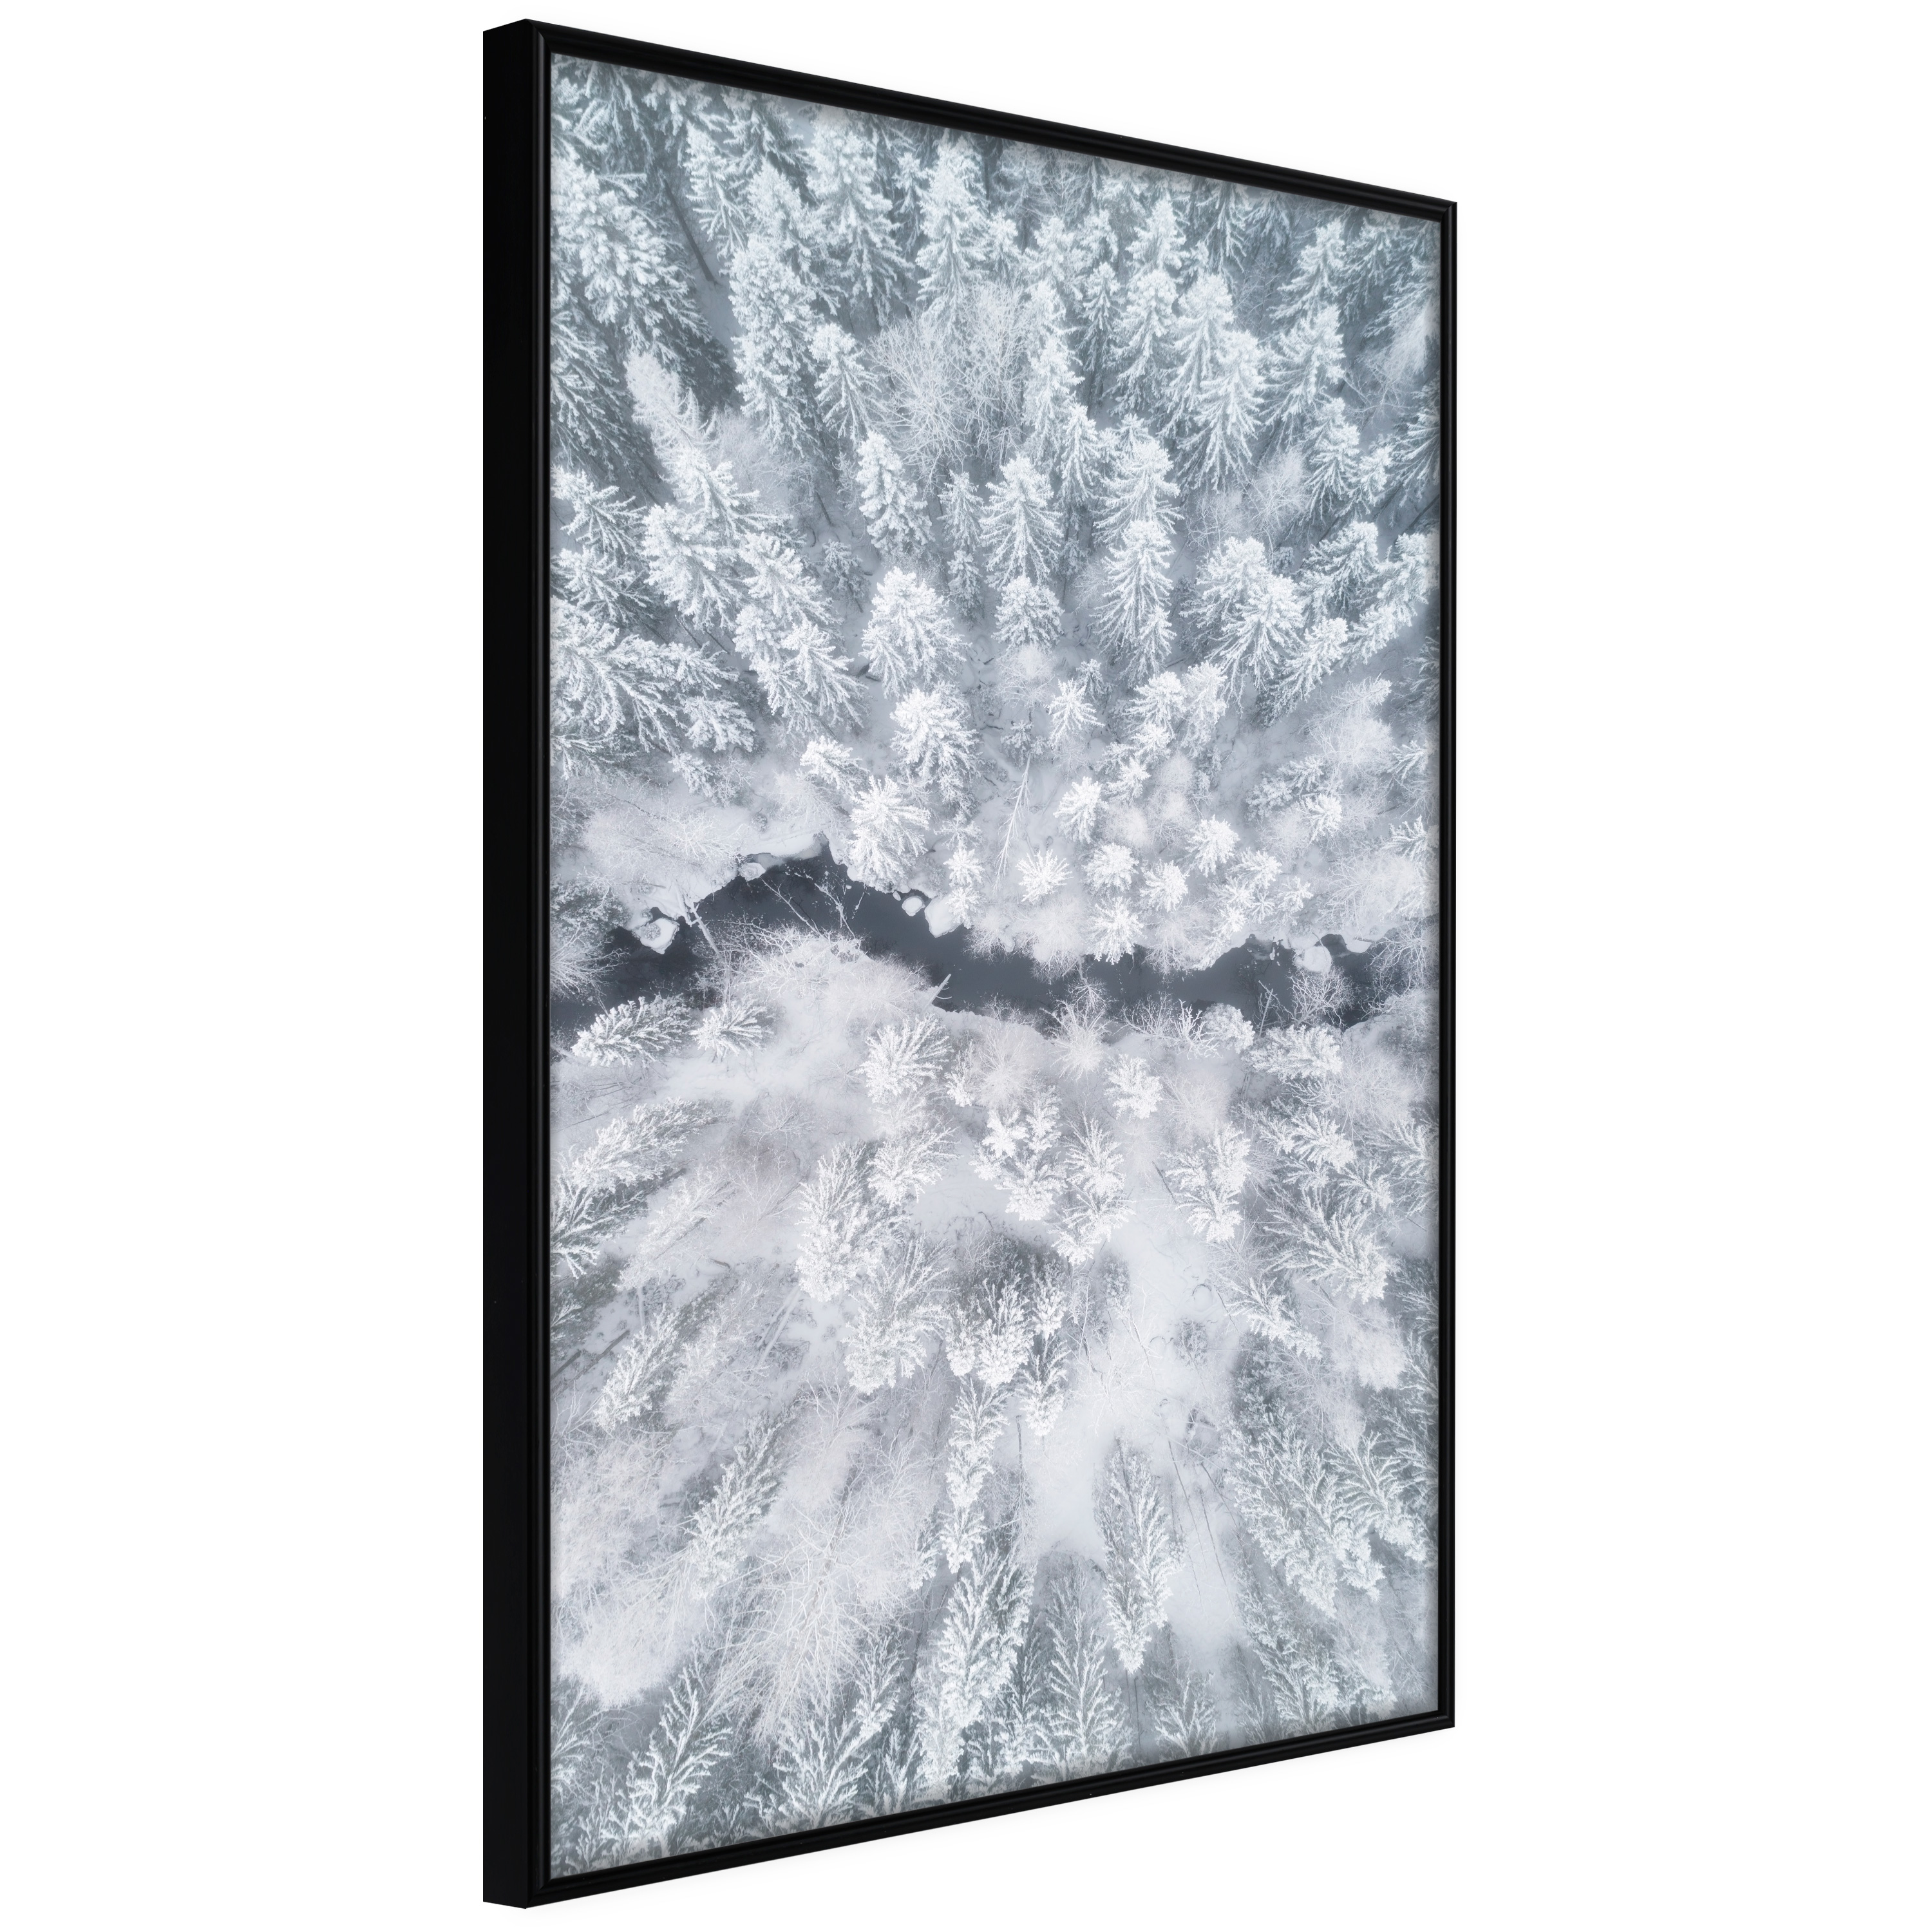 Poster - Winter Forest From a Bird's Eye View - 20x30